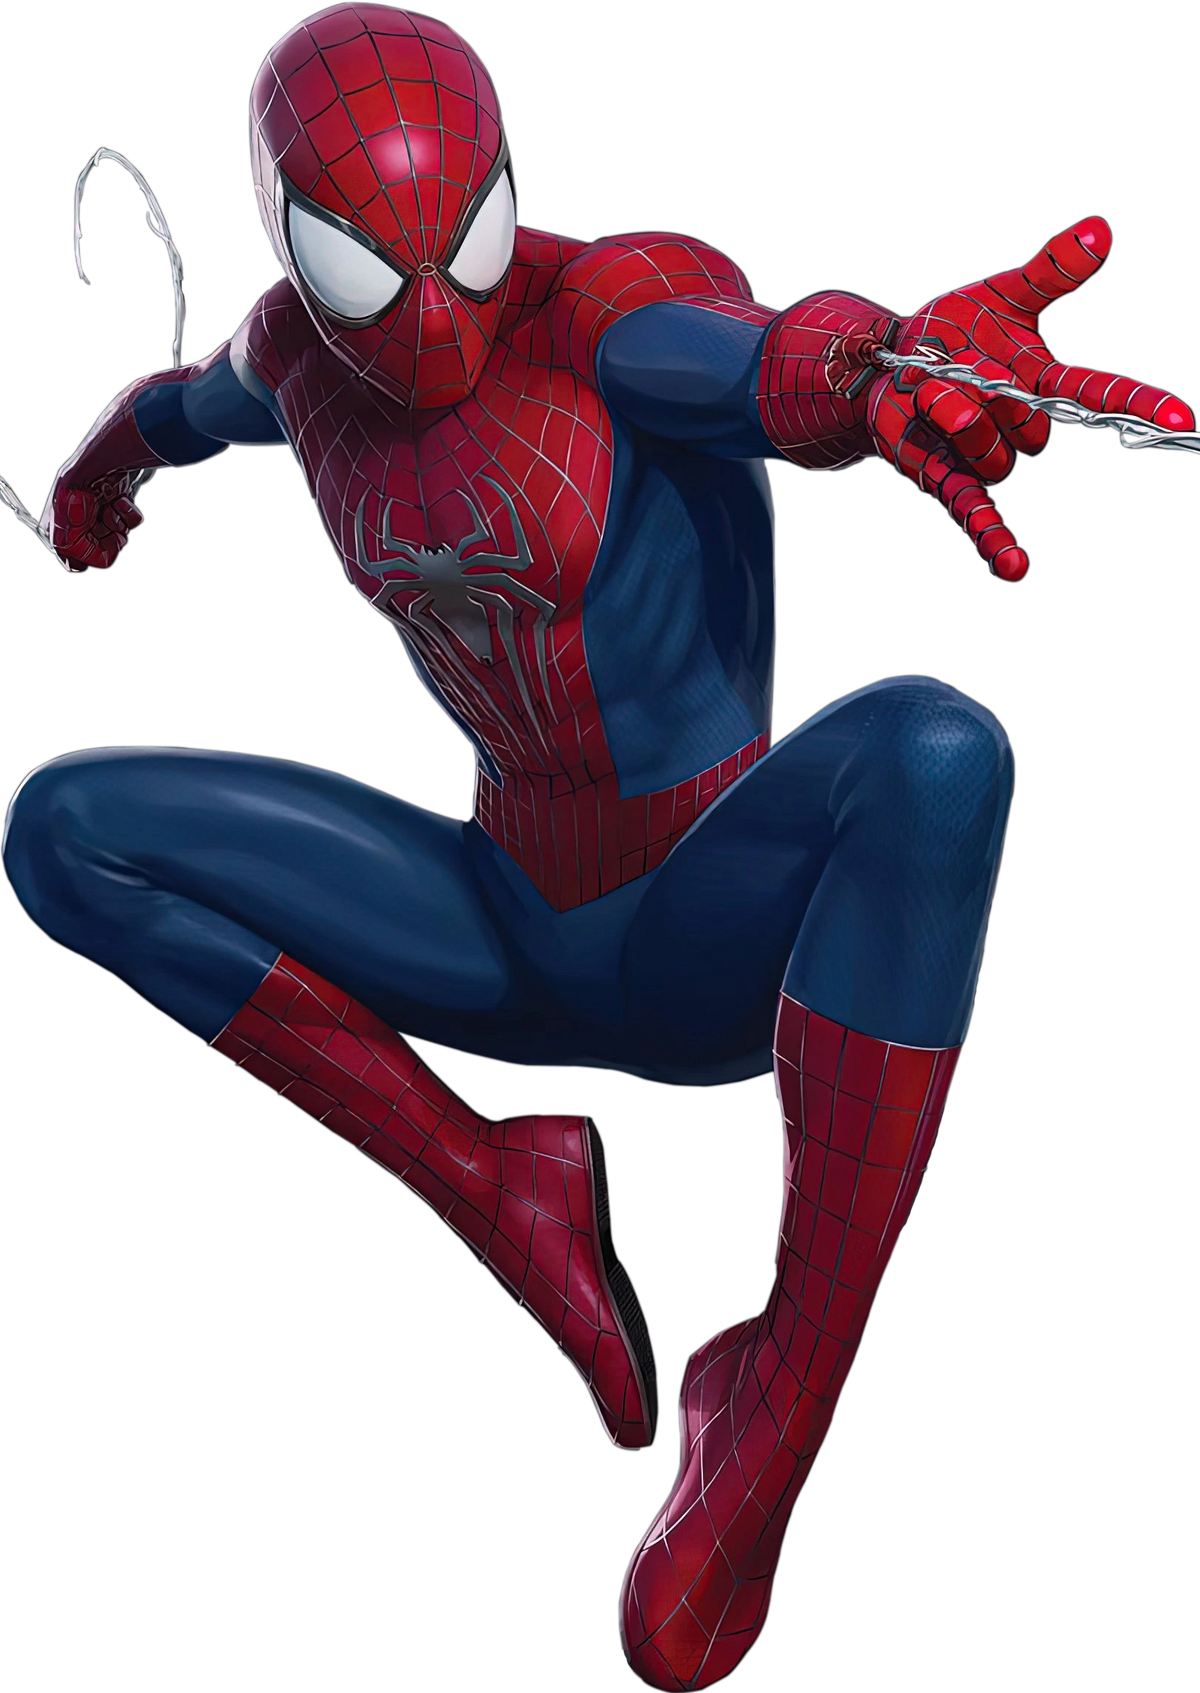 The Amazing Spider-Man: An Unnecessary Reboot Makes a Convincing